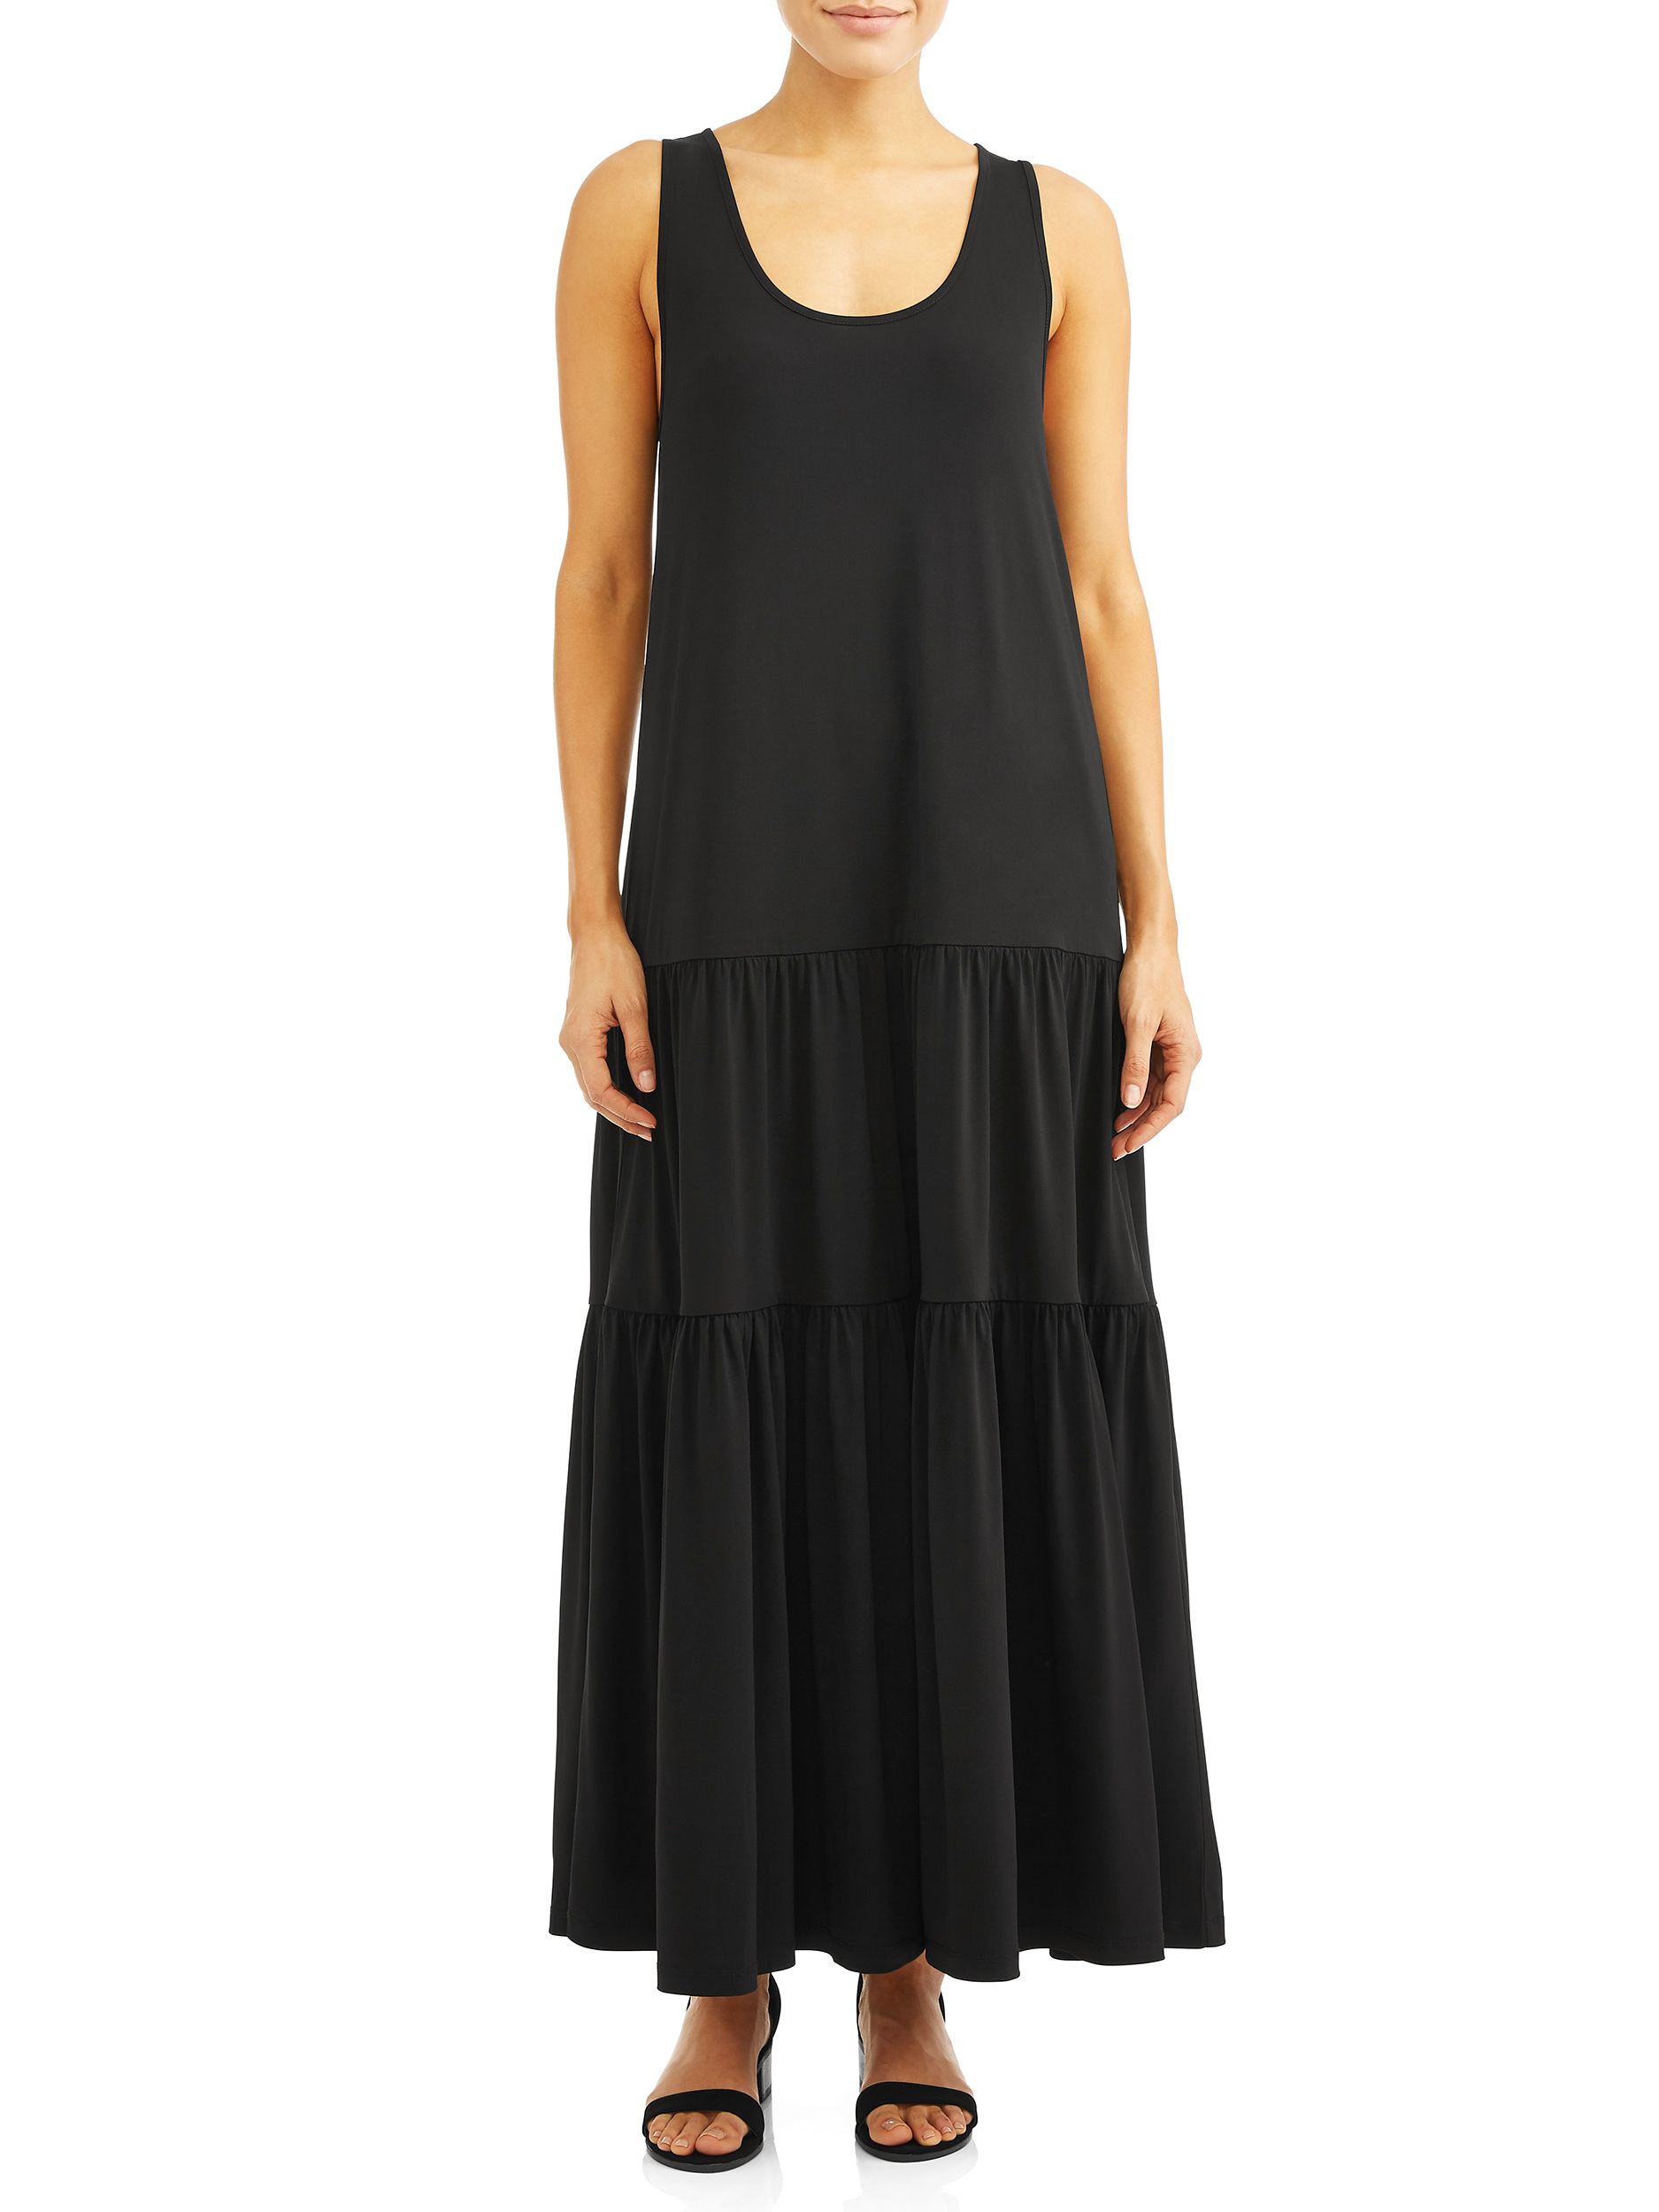 16 Black Maxi Dresses You’ll Live In This Summer | Oye! Times